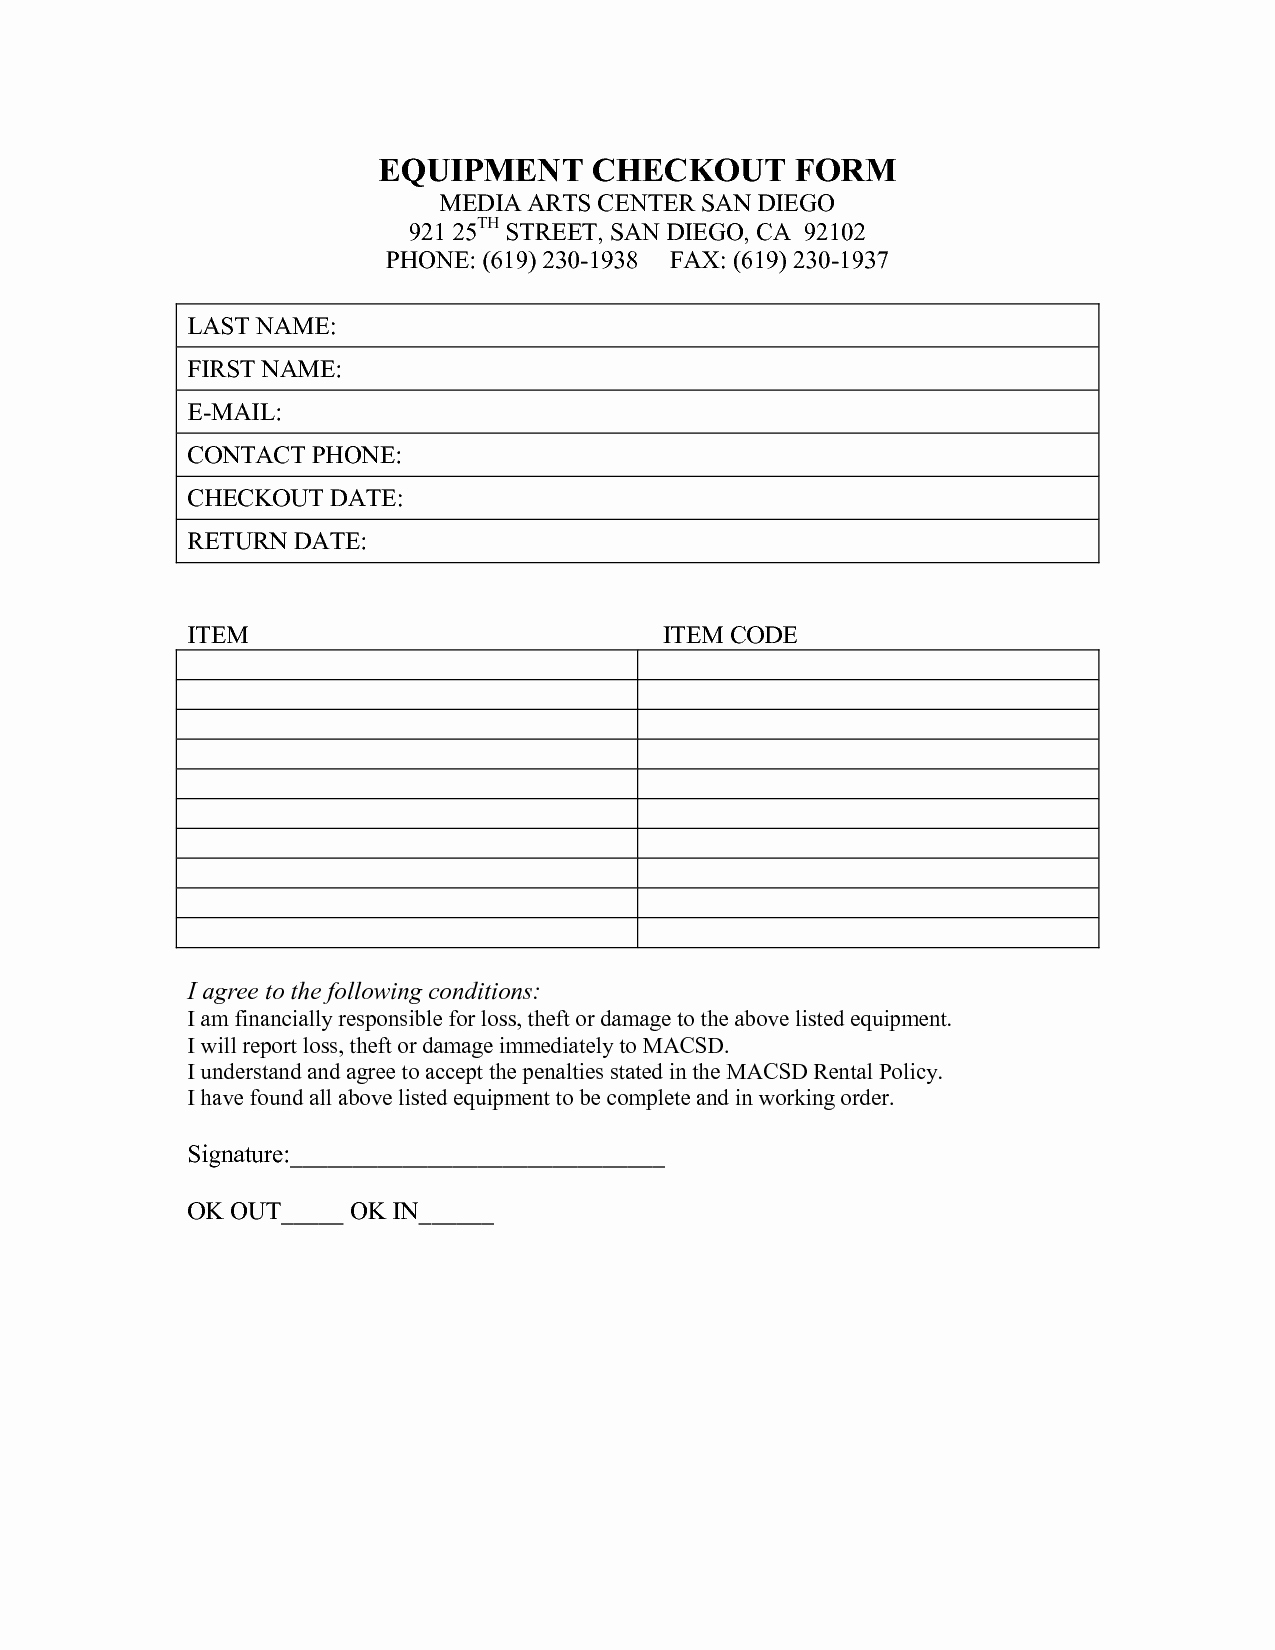 Equipment Checkout Log Luxury Best S Of Check Out form Template Jail Equipment